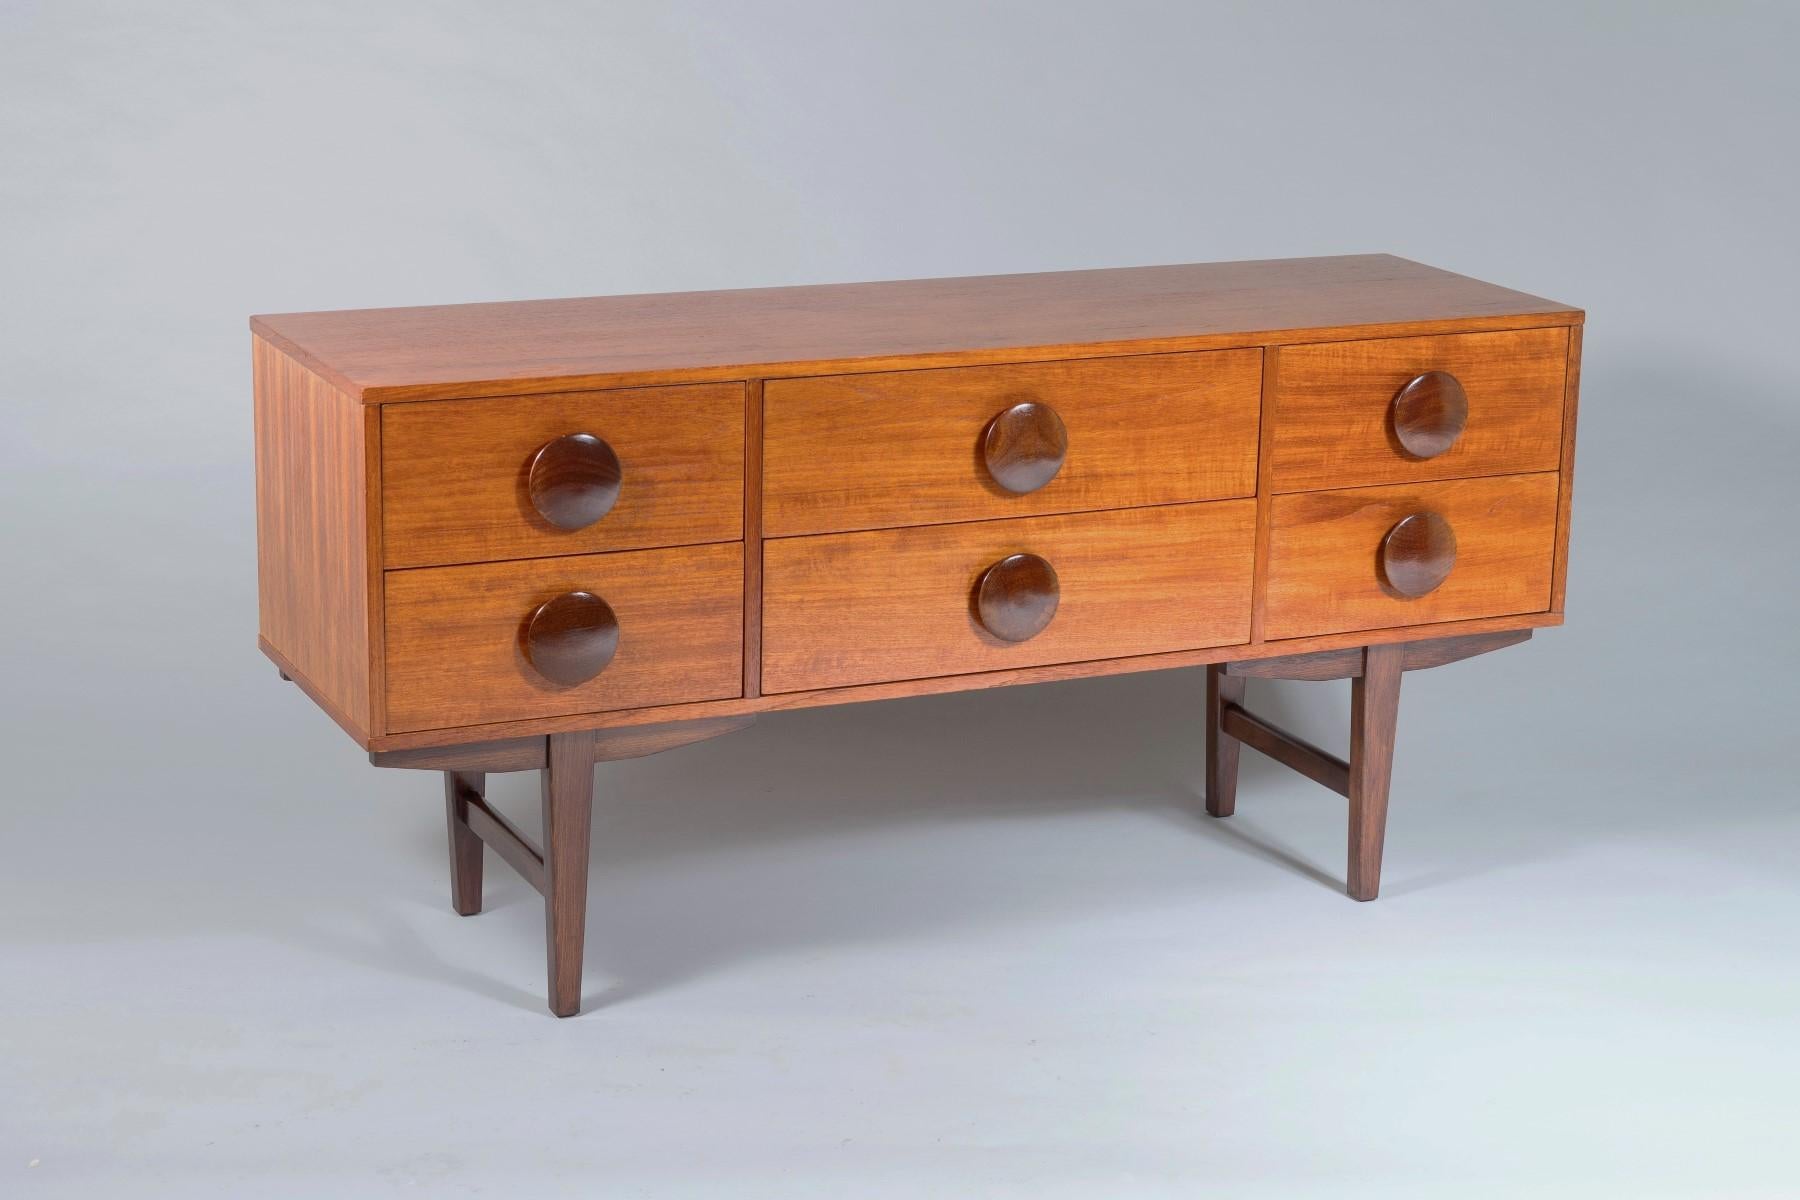 British A 1960s Mid Century Button Handled Teak Sideboard  6 drawer Credenza For Sale